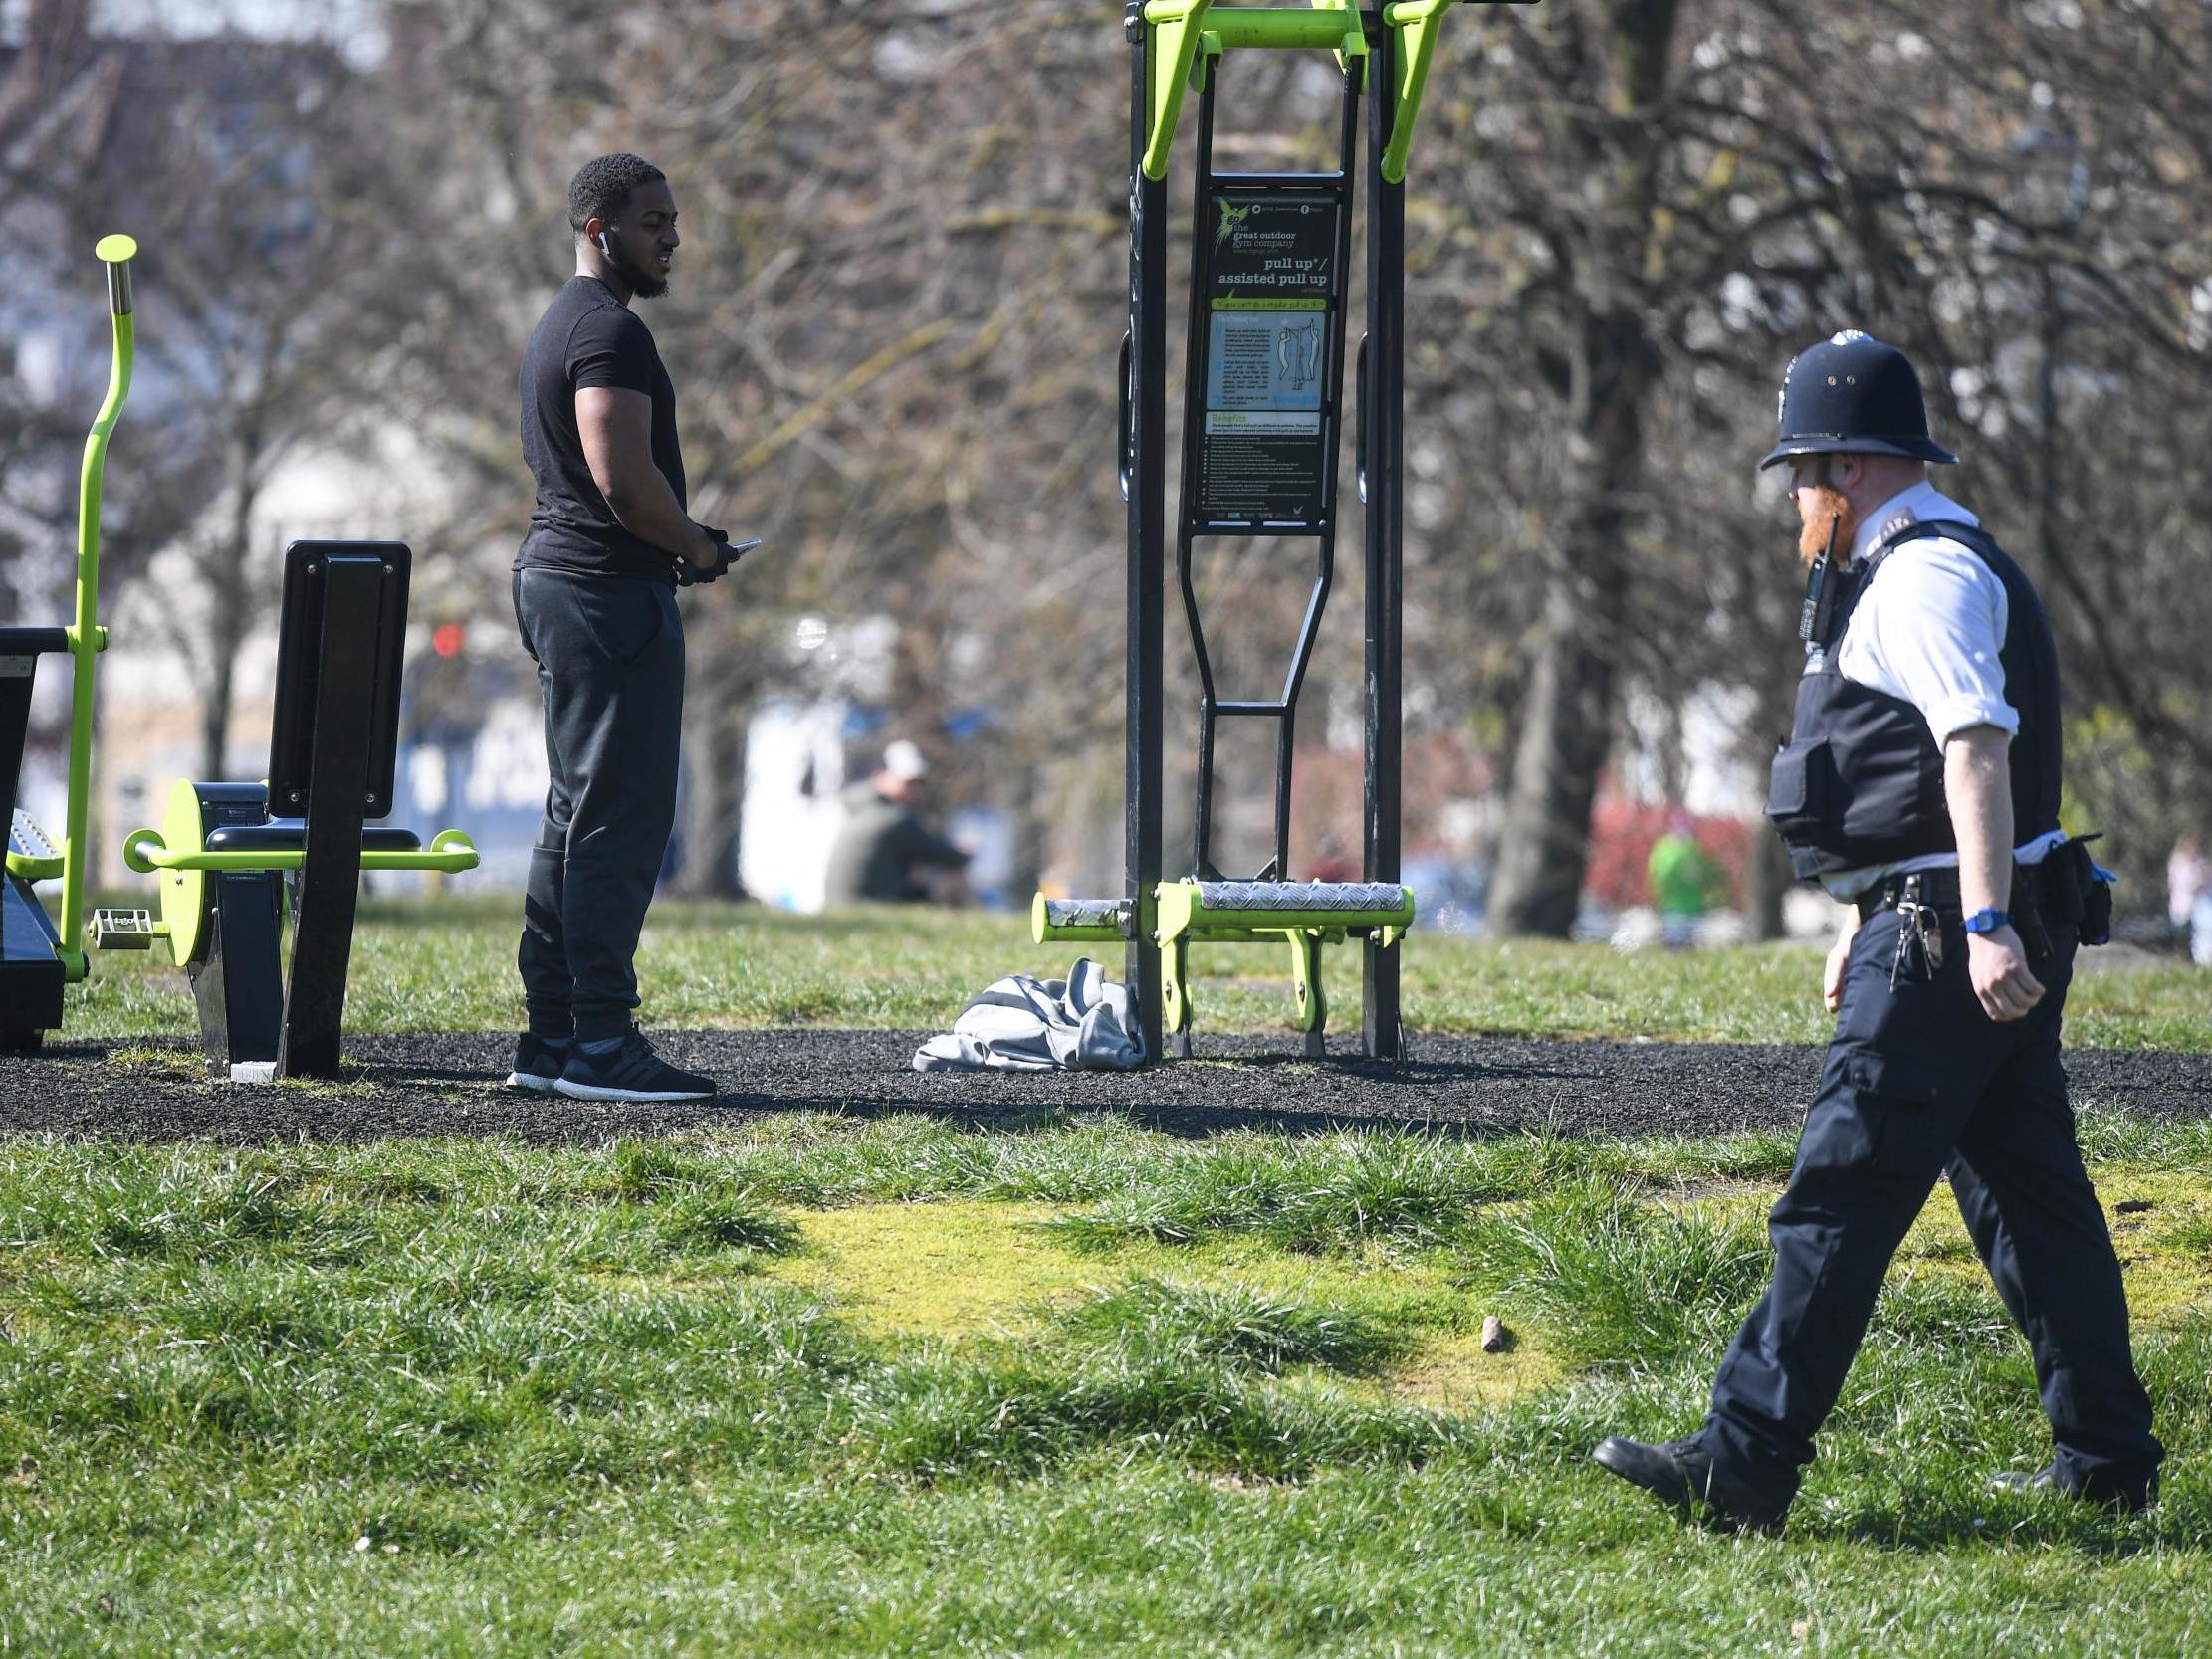 A police officer speaks to people on Clapham Common, south London, in March during the UK’s coronavirus lockdown